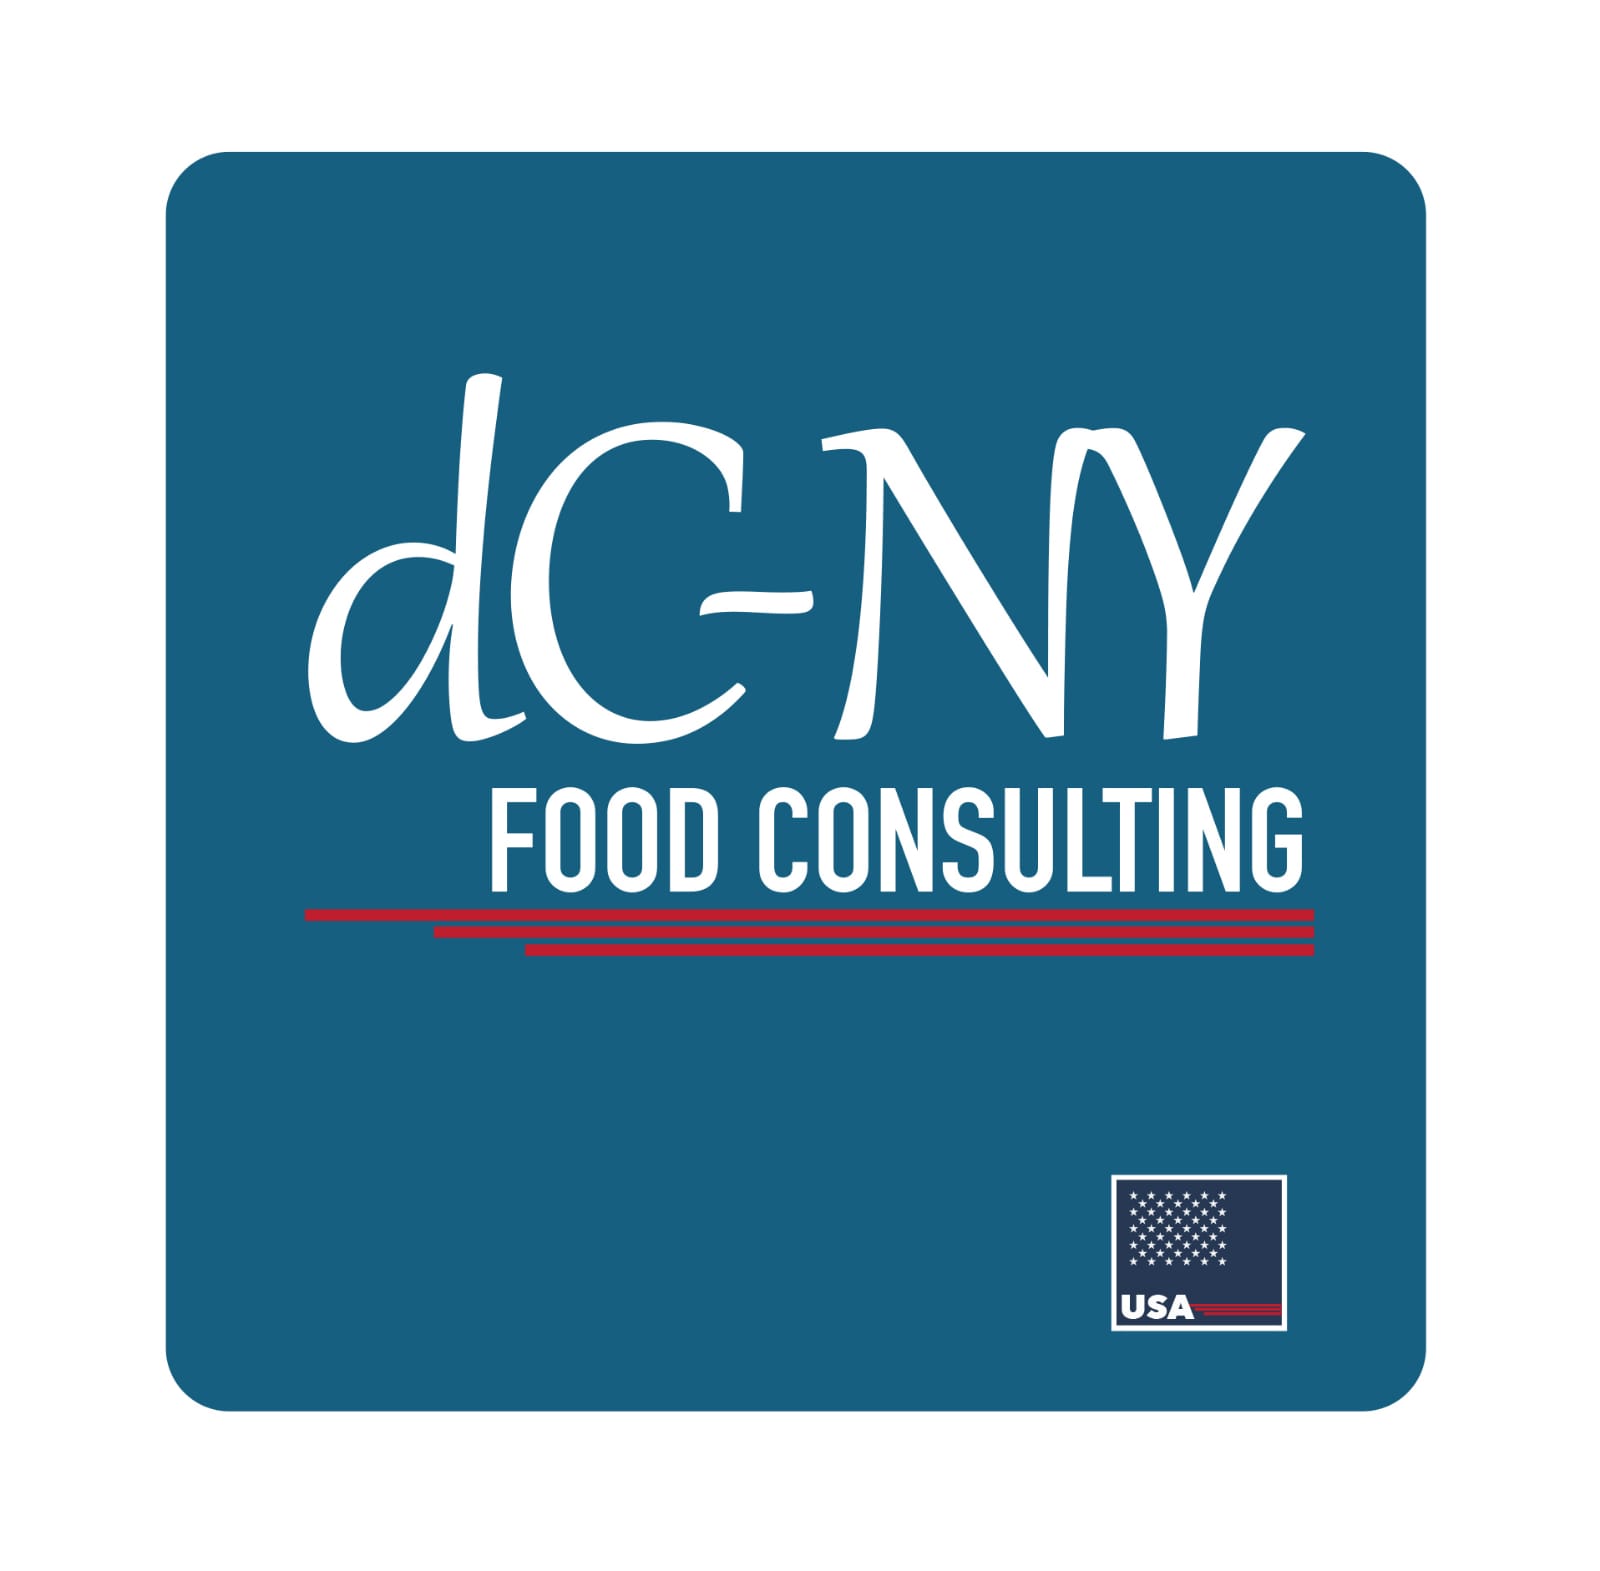 DC-NY Food Consulting LLC